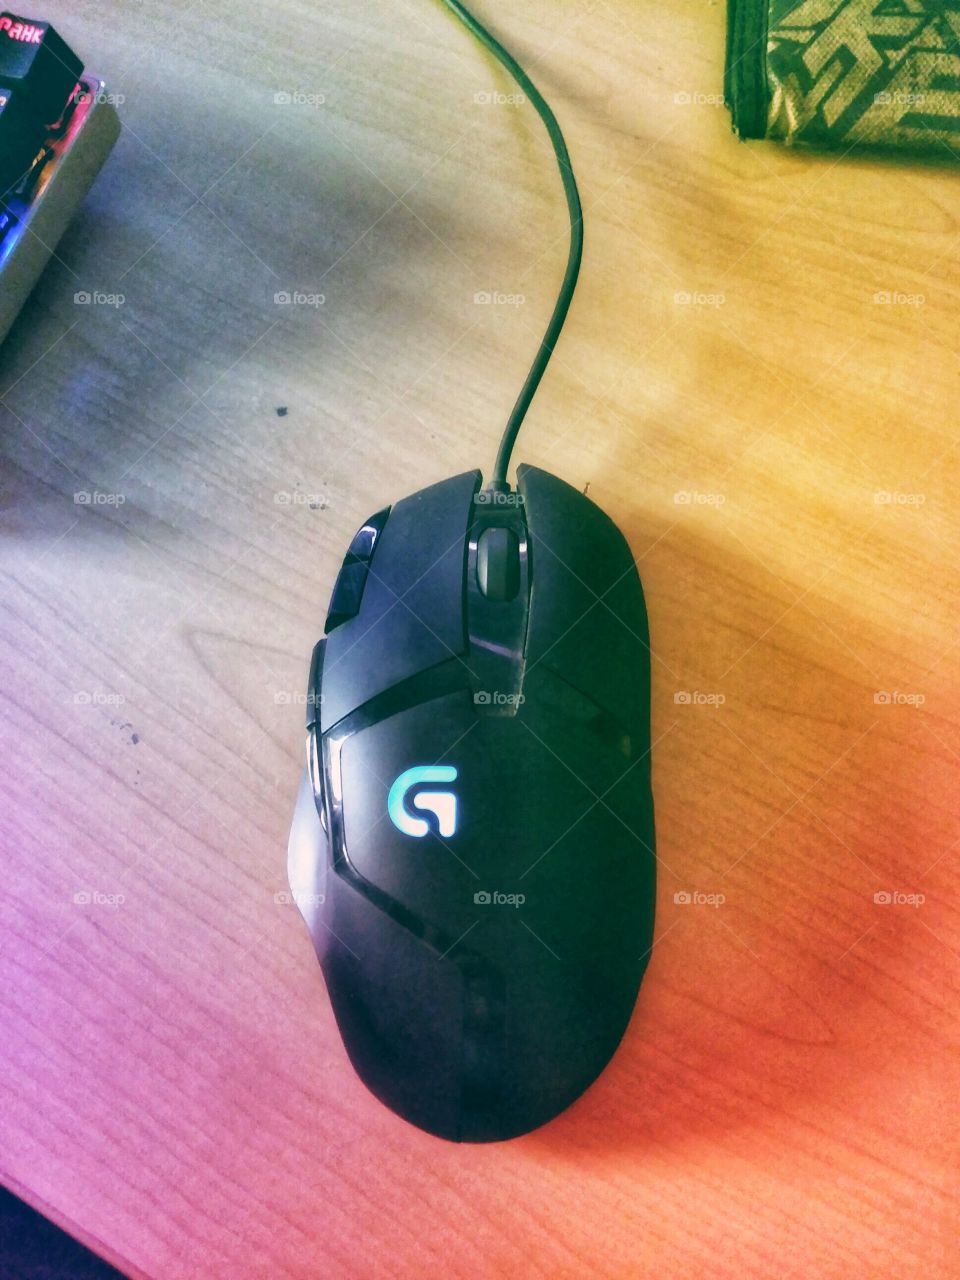 a beautiful mouse on the desk